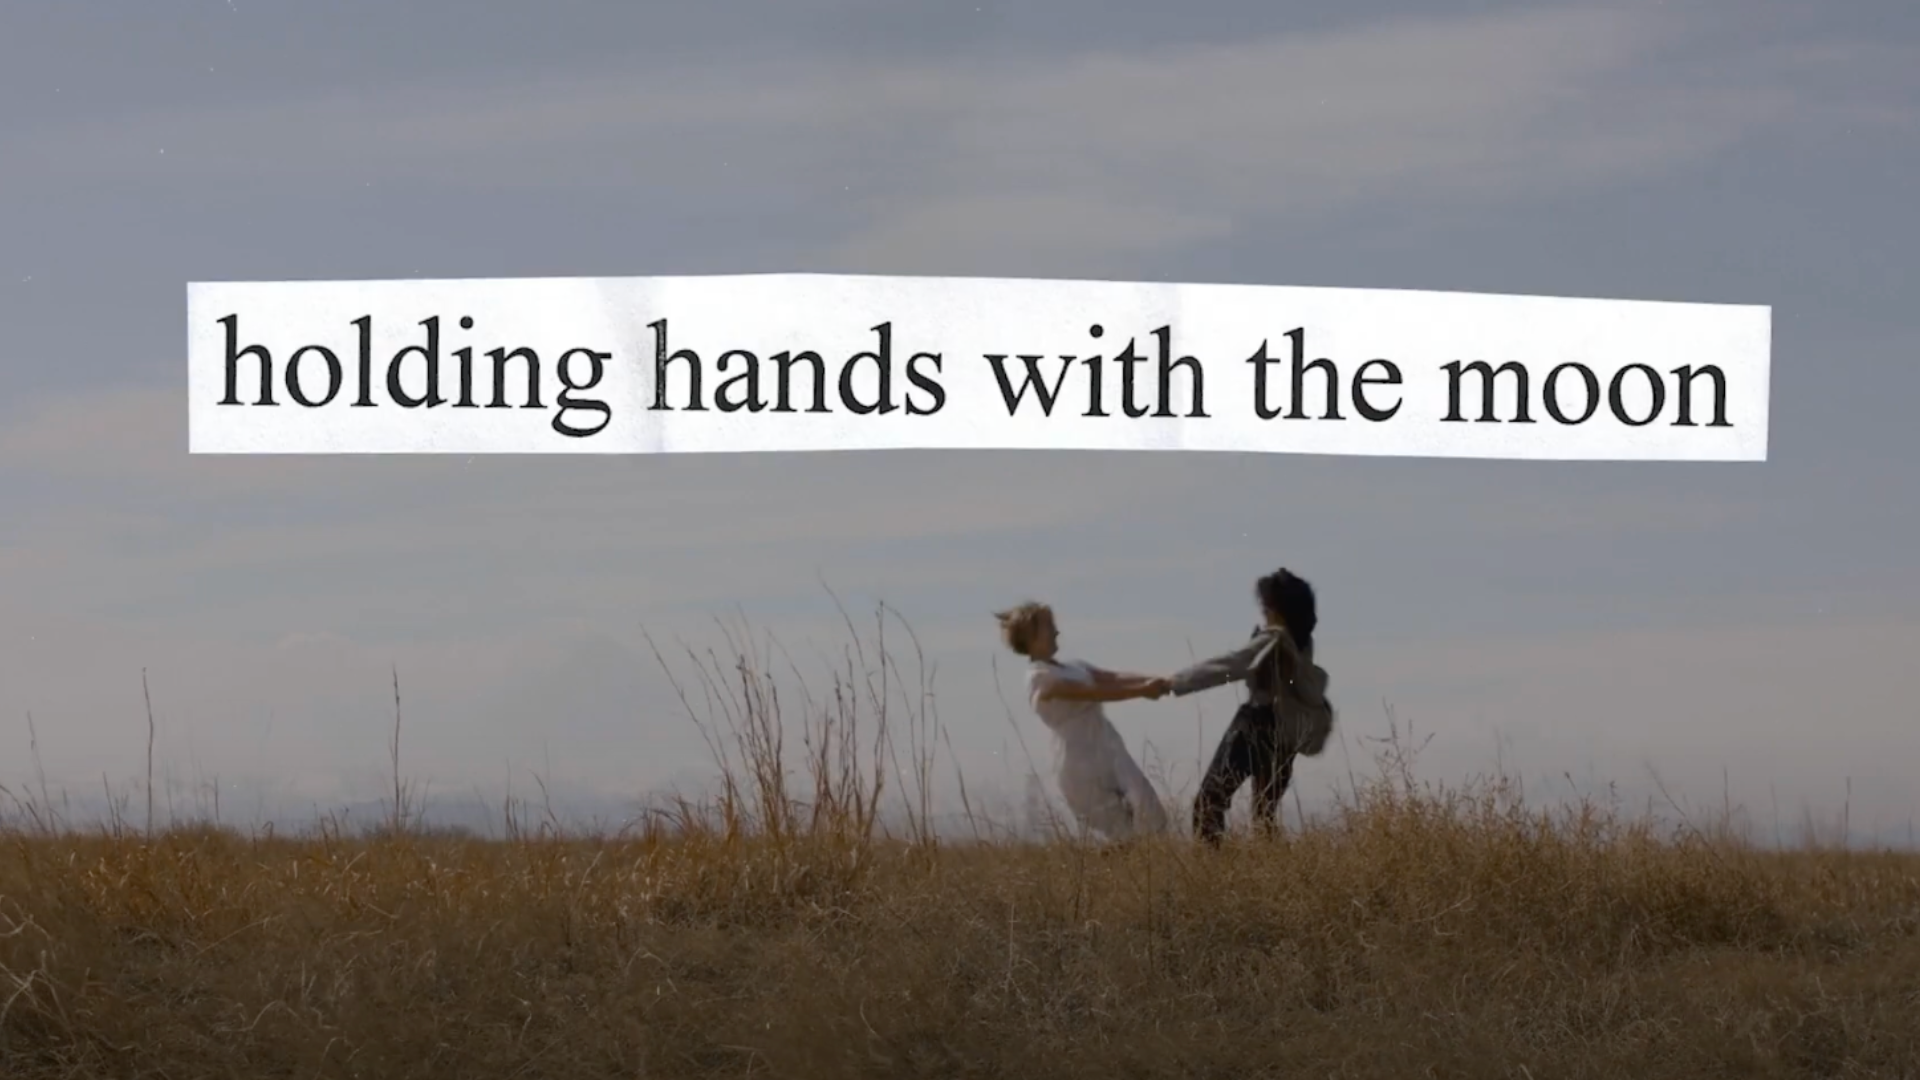 Film still featuring two people holding hands and spinning around in a circle. Text overlaid on the still image reads, "holding hands with the moon."